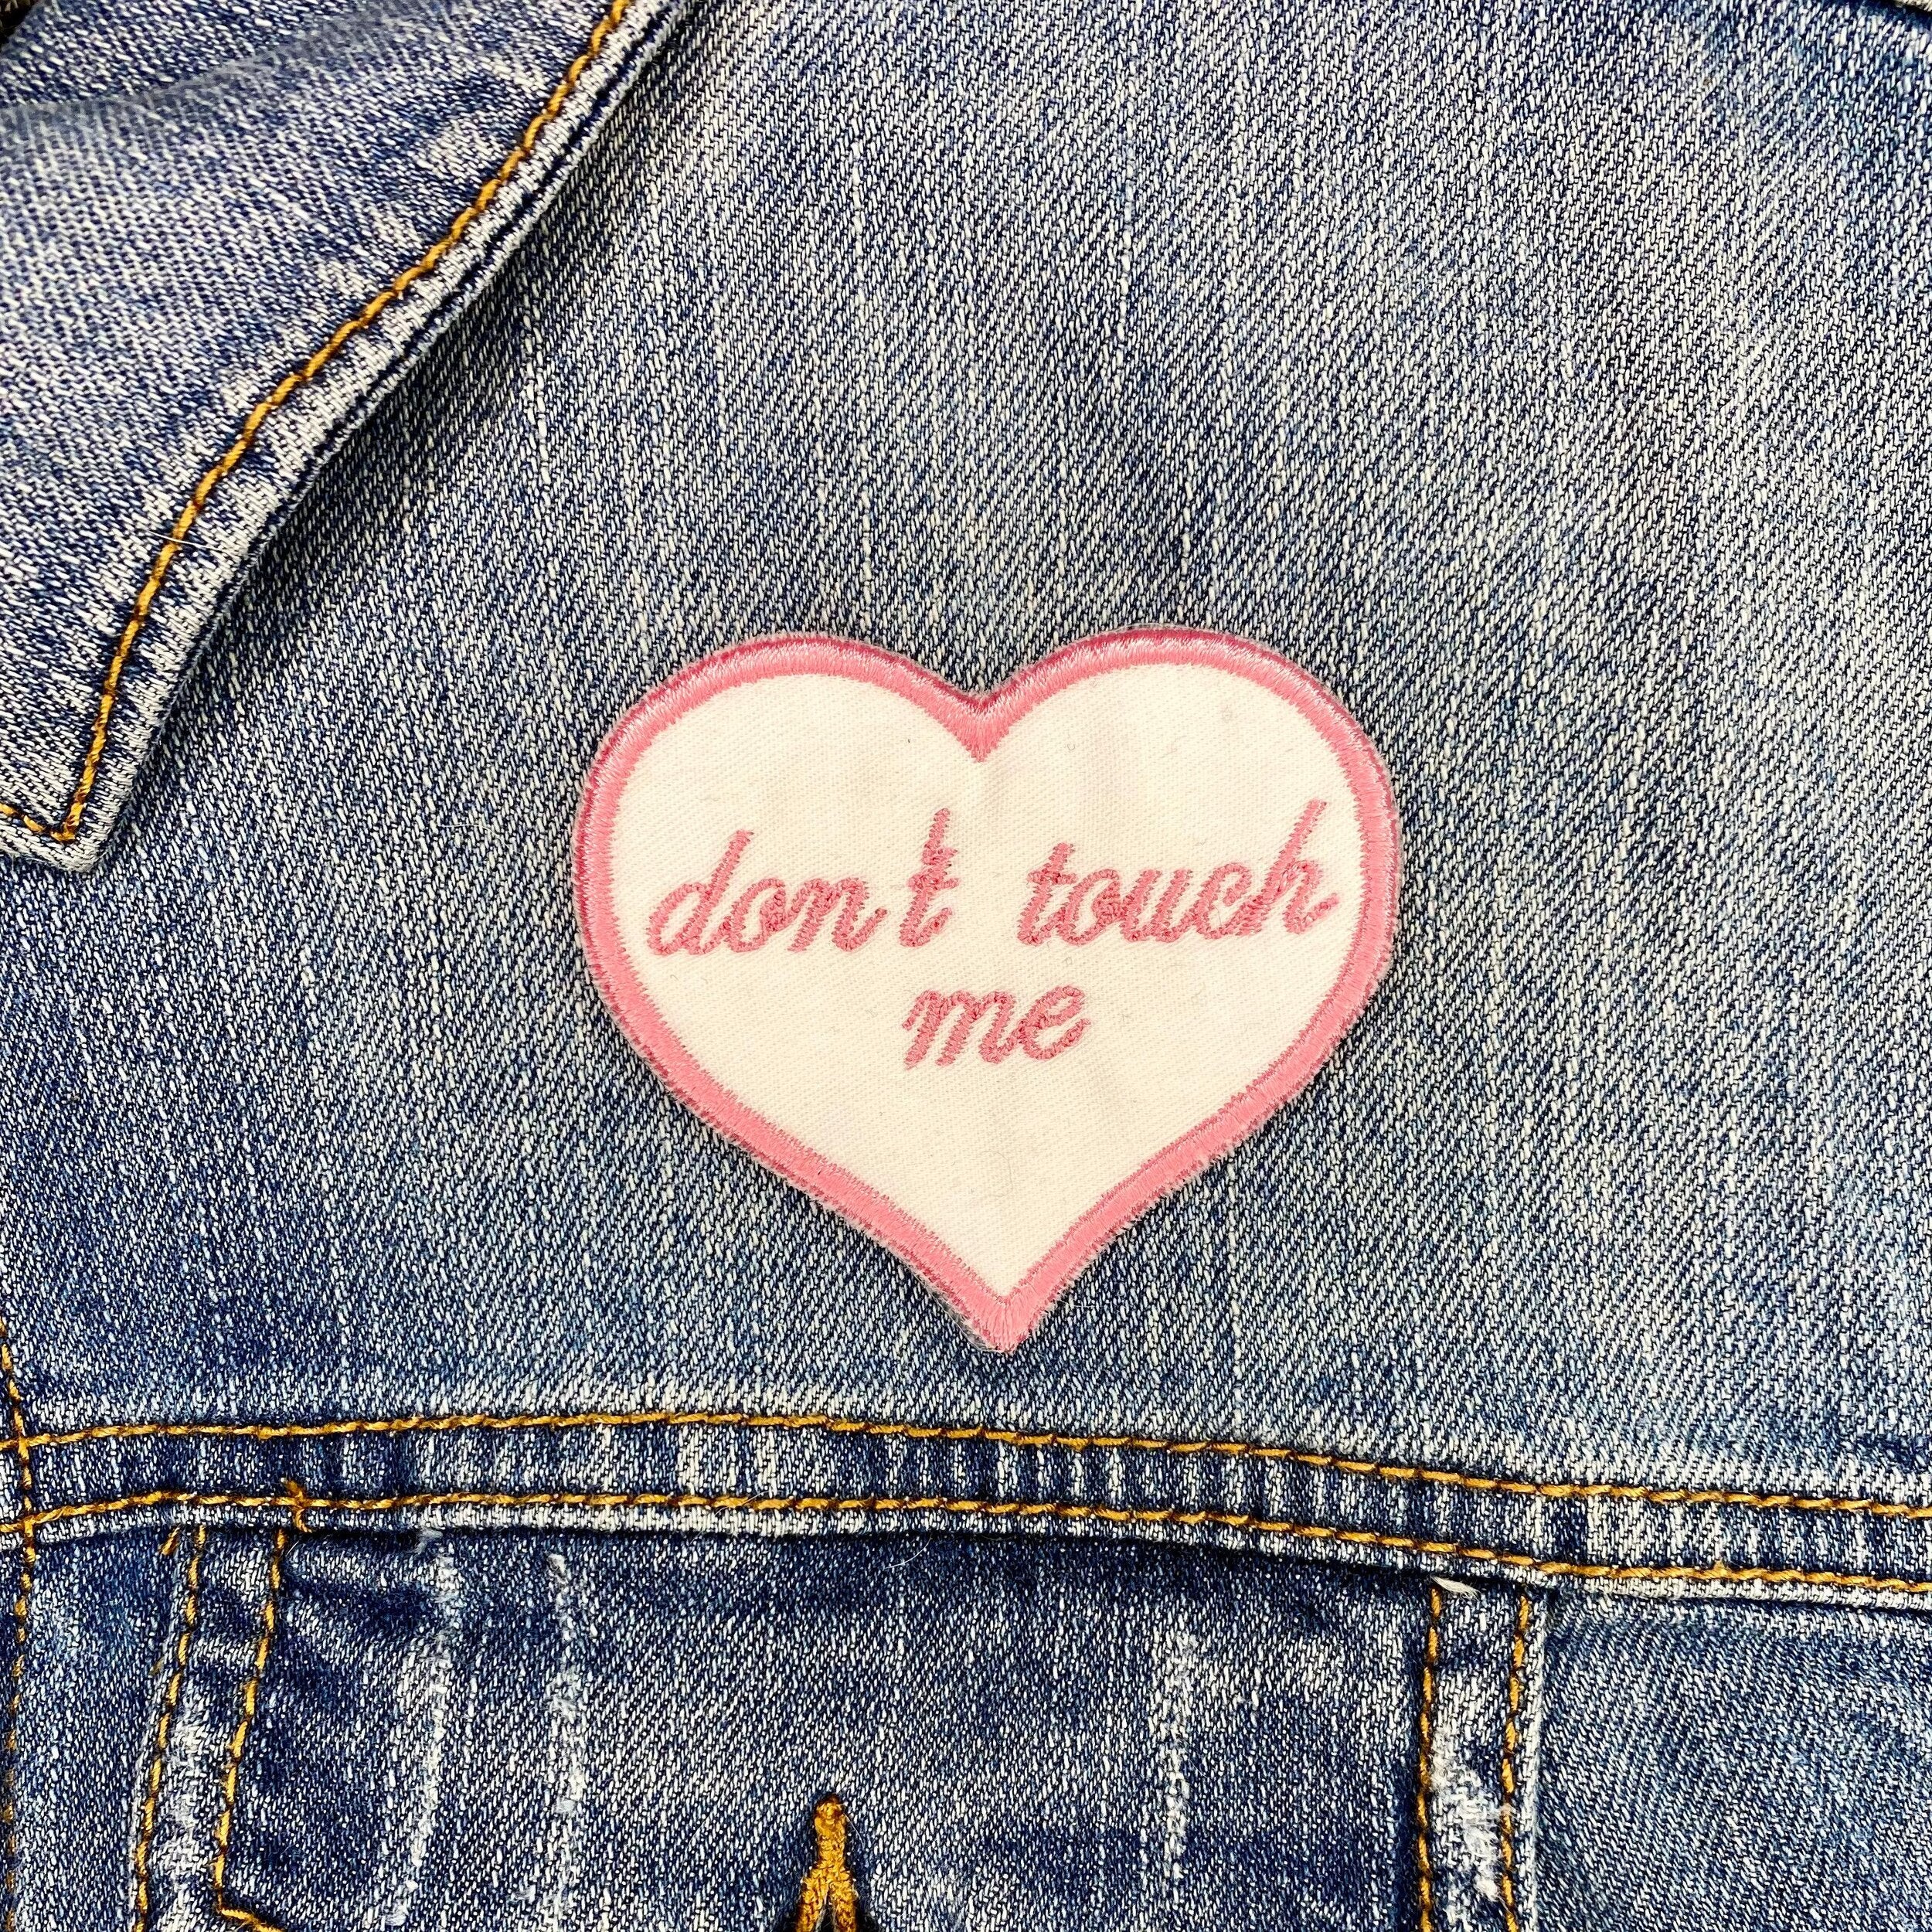 Don’t touch me Embroidered Iron-on Patch - IncredibleGood Inc